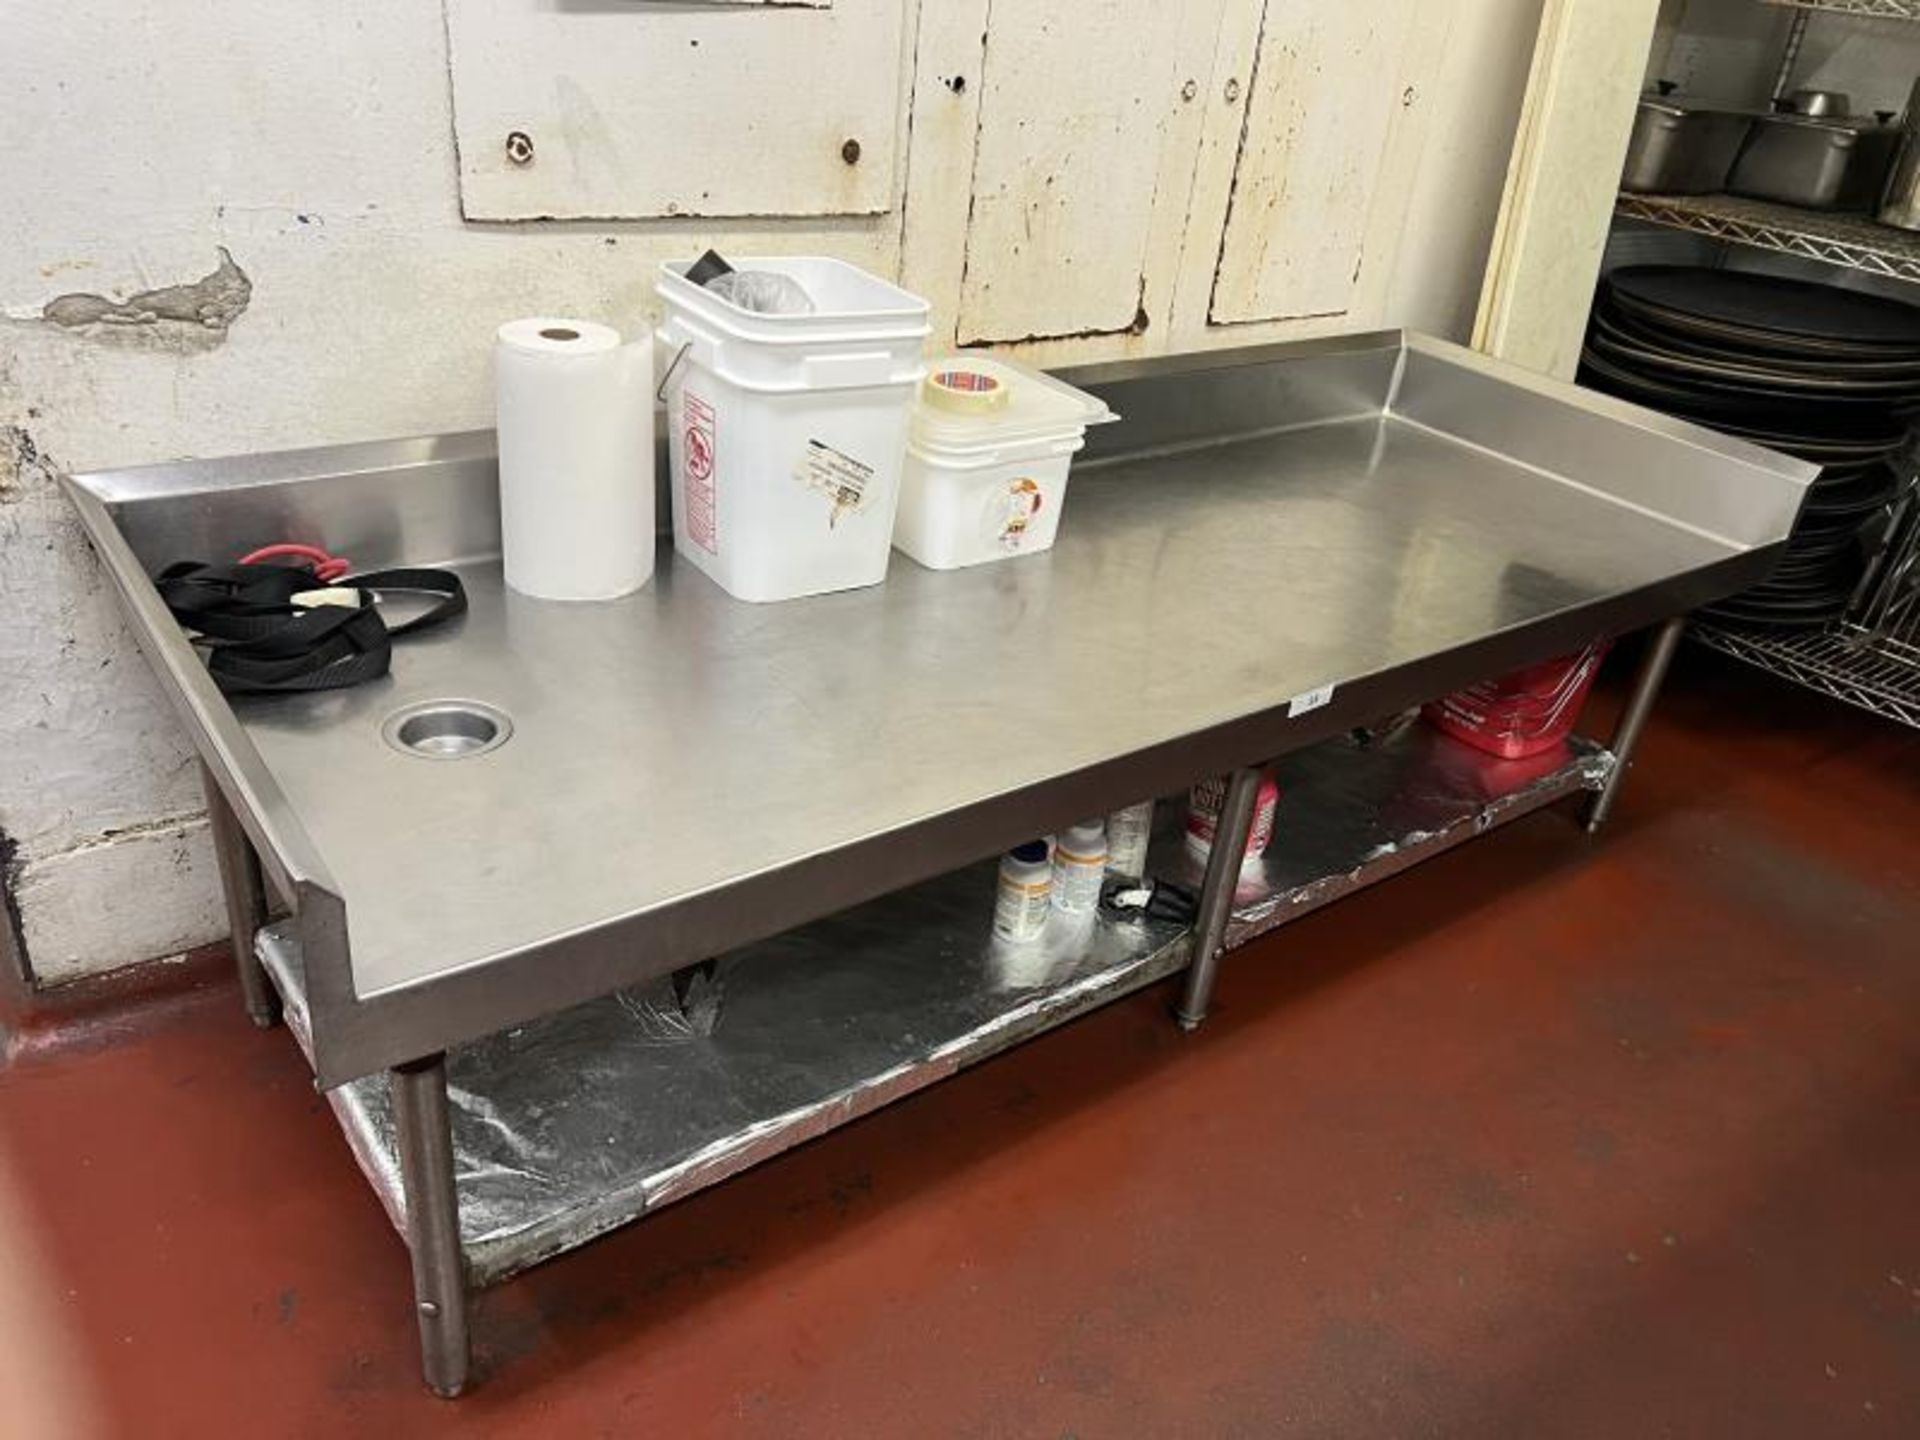 Stainless Steel Drying Table with Lower Shelf 7' Long x 30" Deep x 26" Tall in Main Kitchen